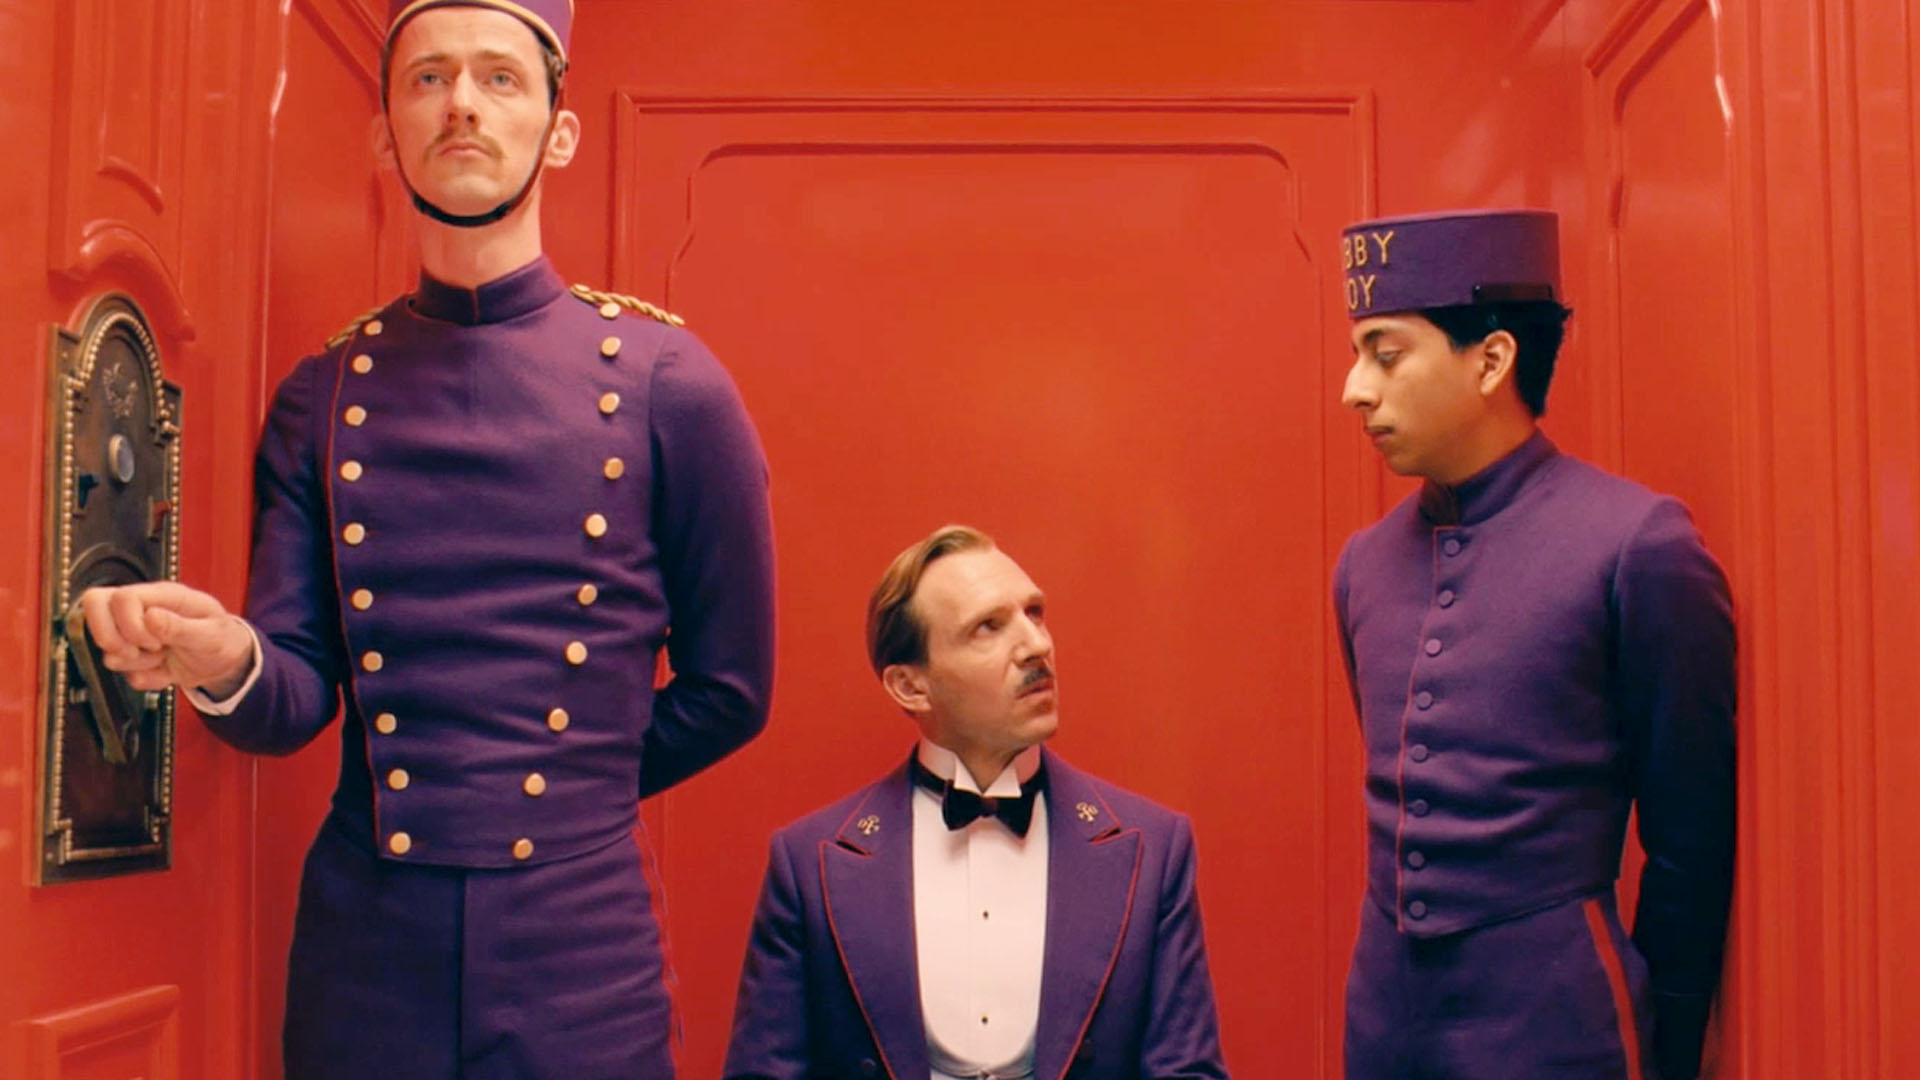 The Grand Budapest Hotel review